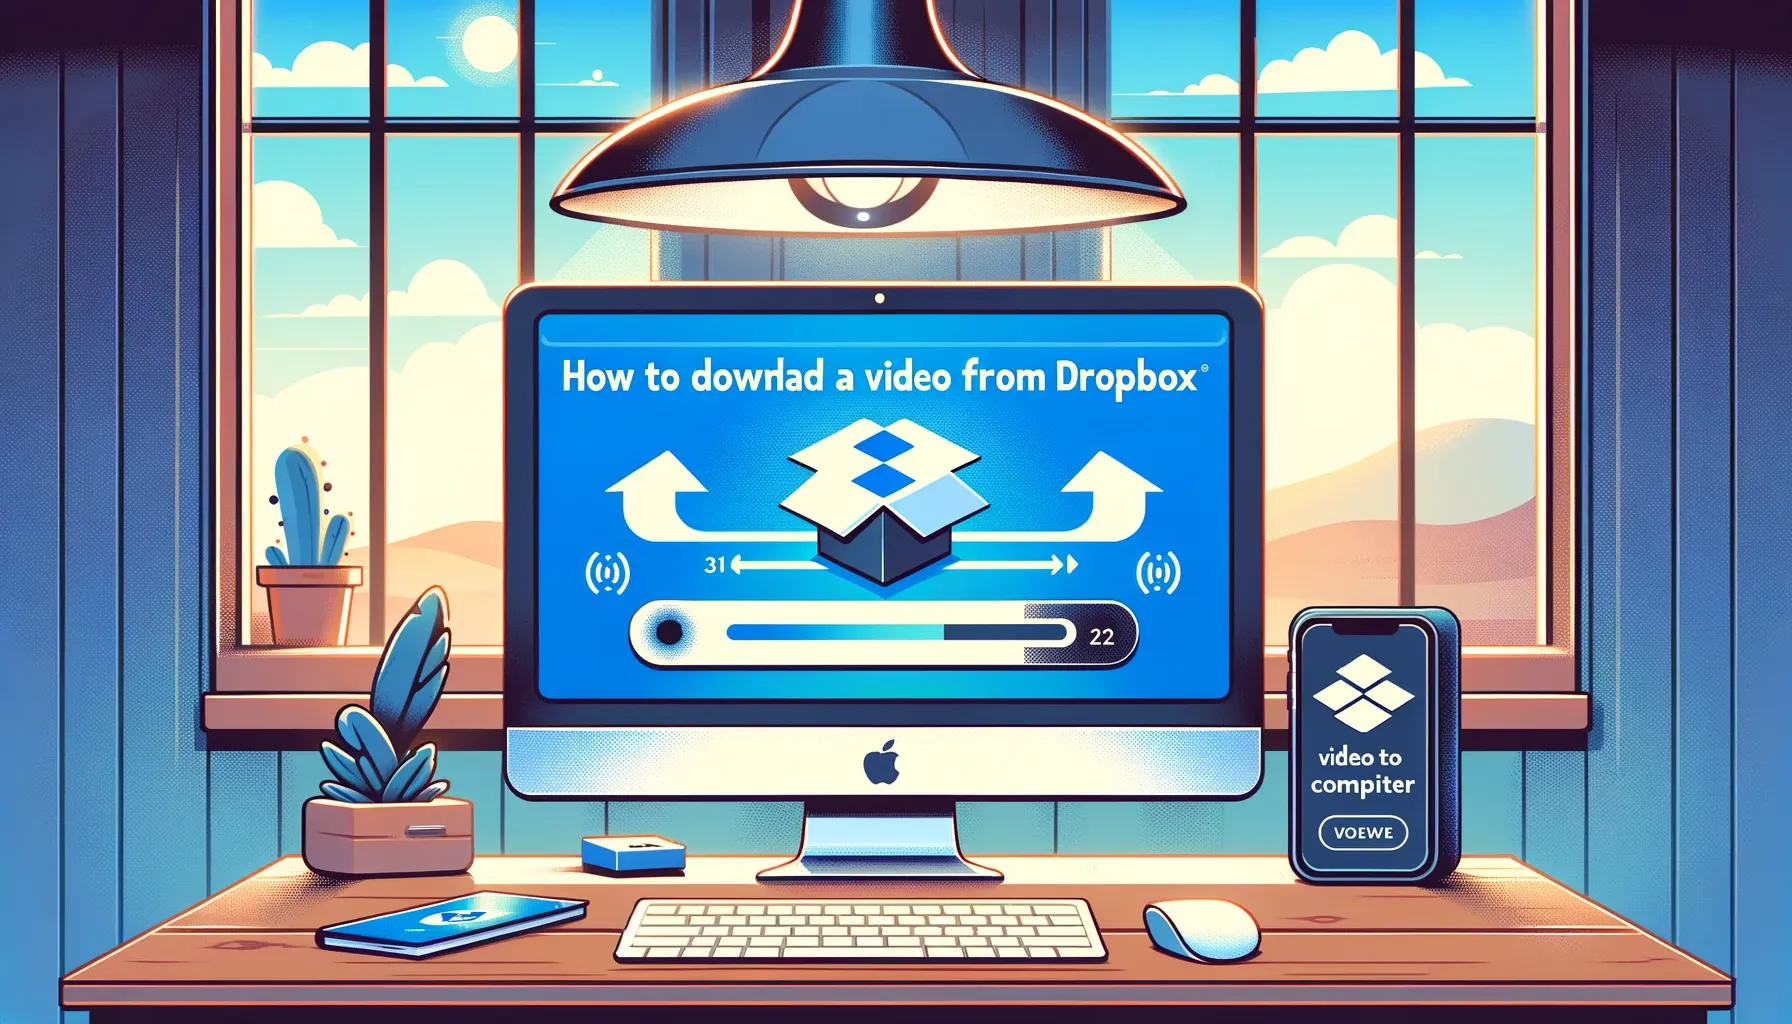 How to download a video from Dropbox to computer